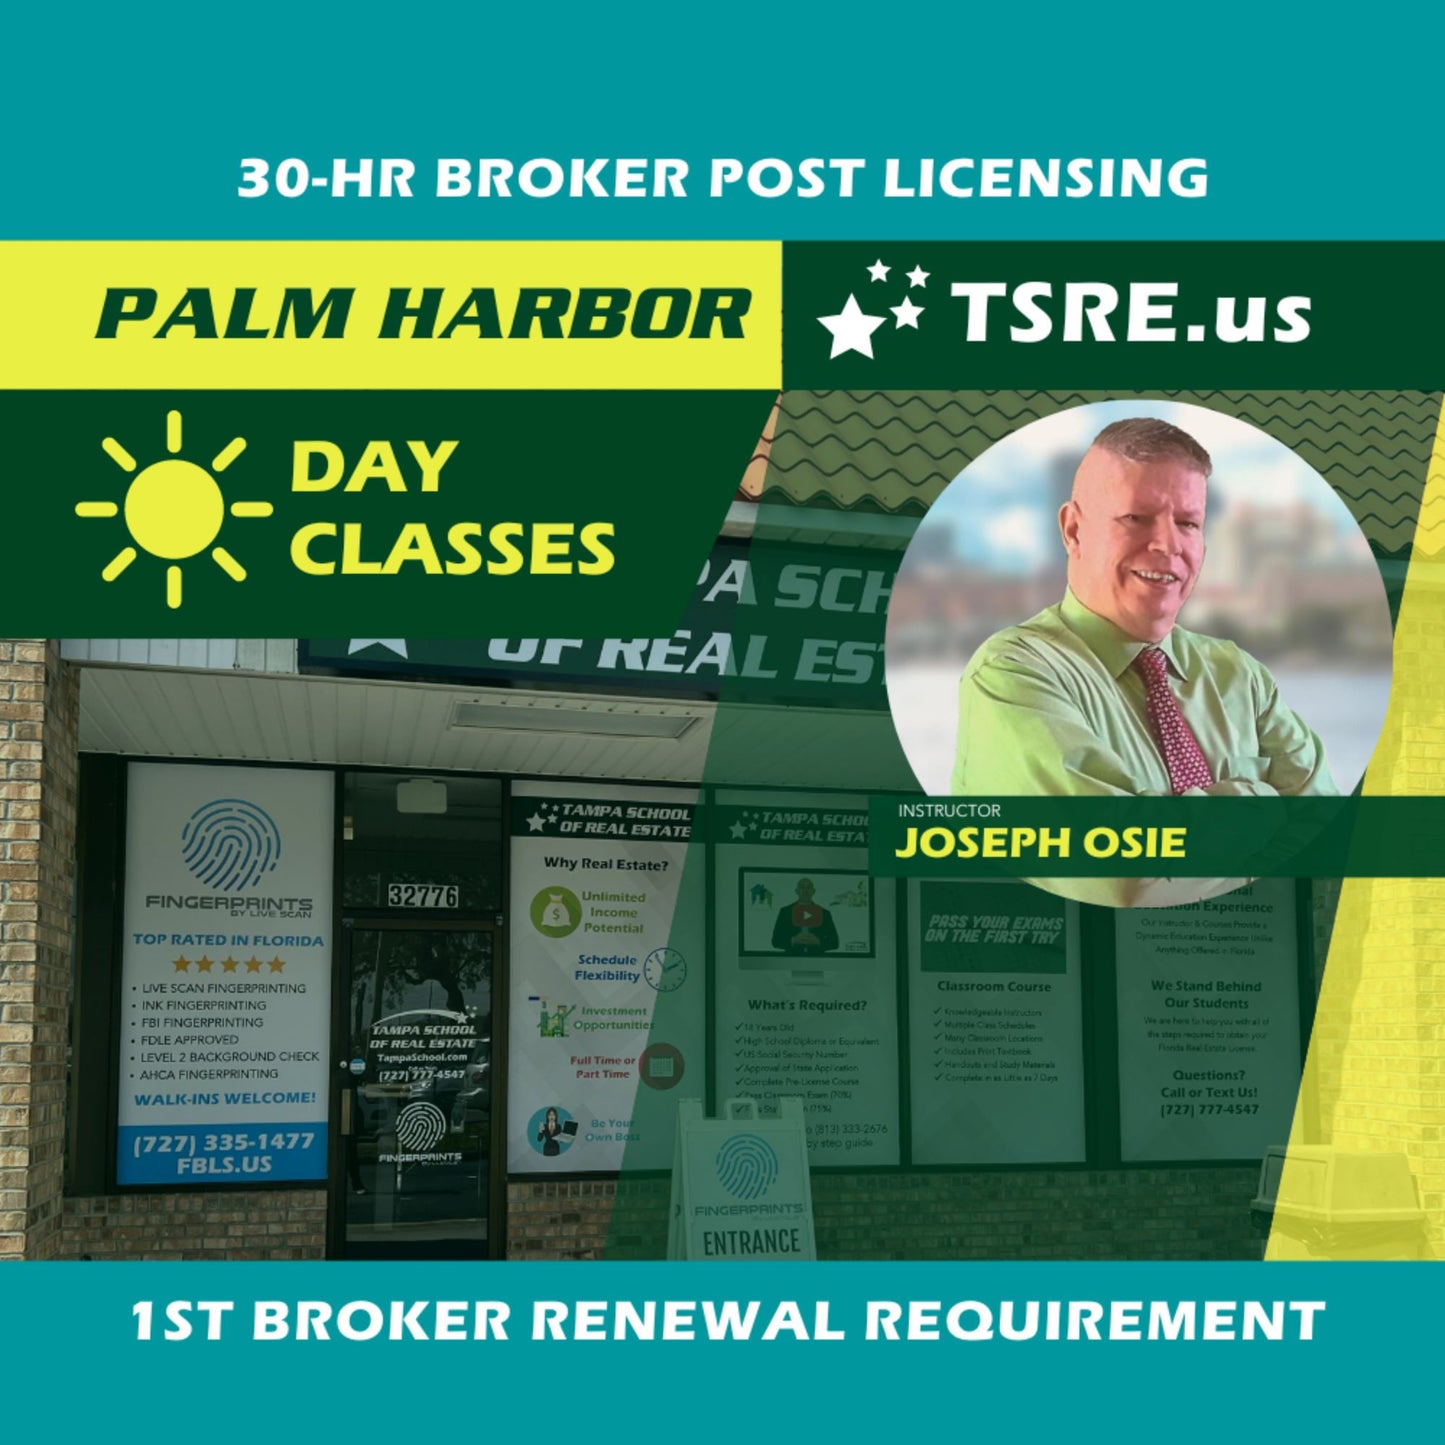 Palm Harbor | Mar 27 9:00am | BKFIN TSRE Palm Harbor | Tampa School of Real Estate 